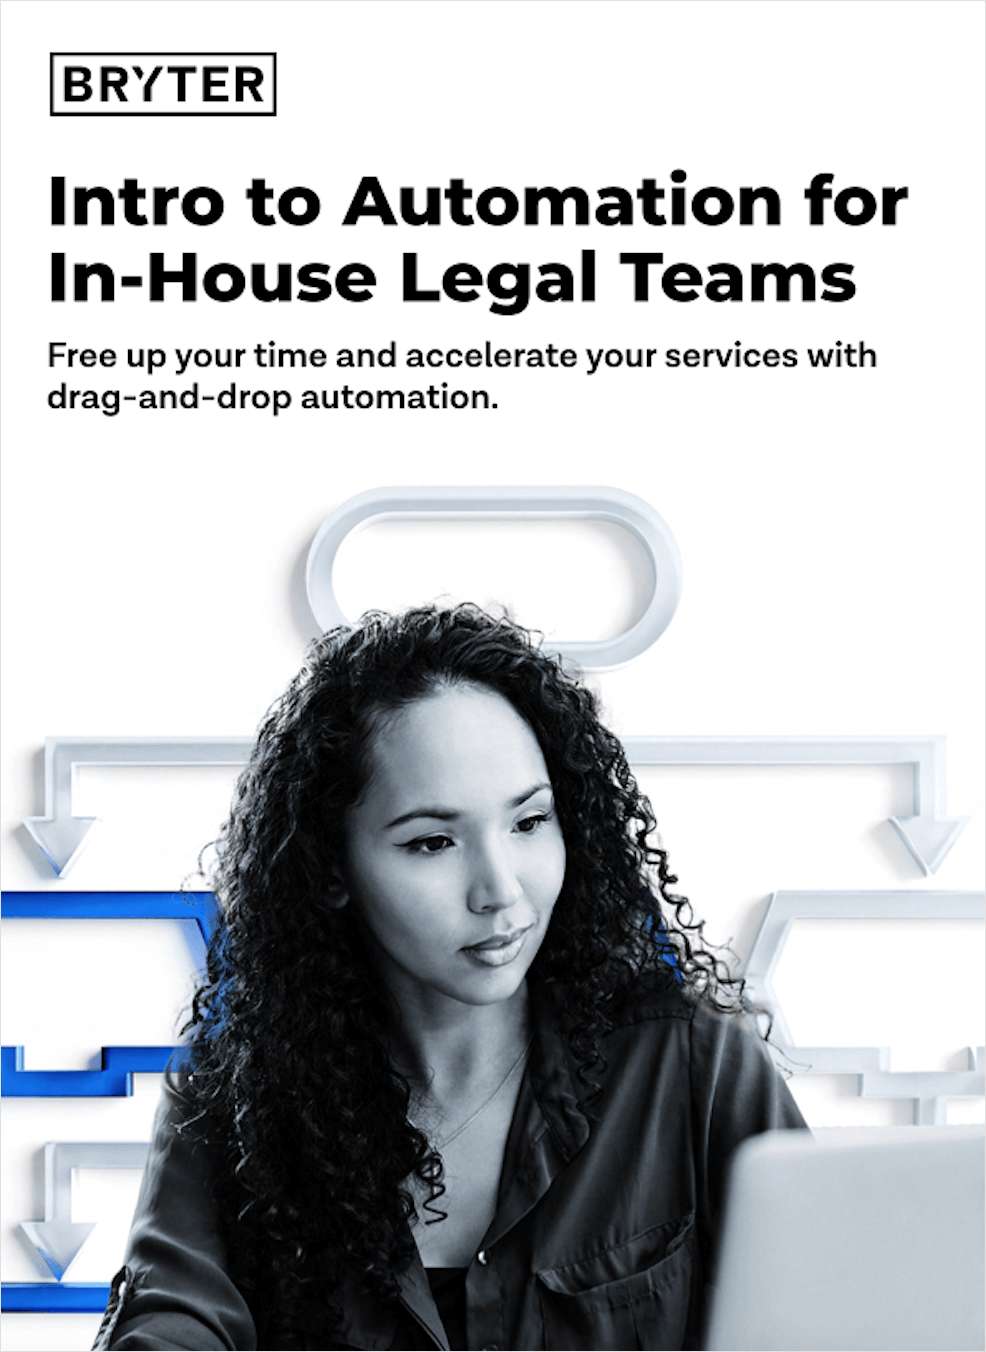 Intro to Automation for In-House Legal Teams